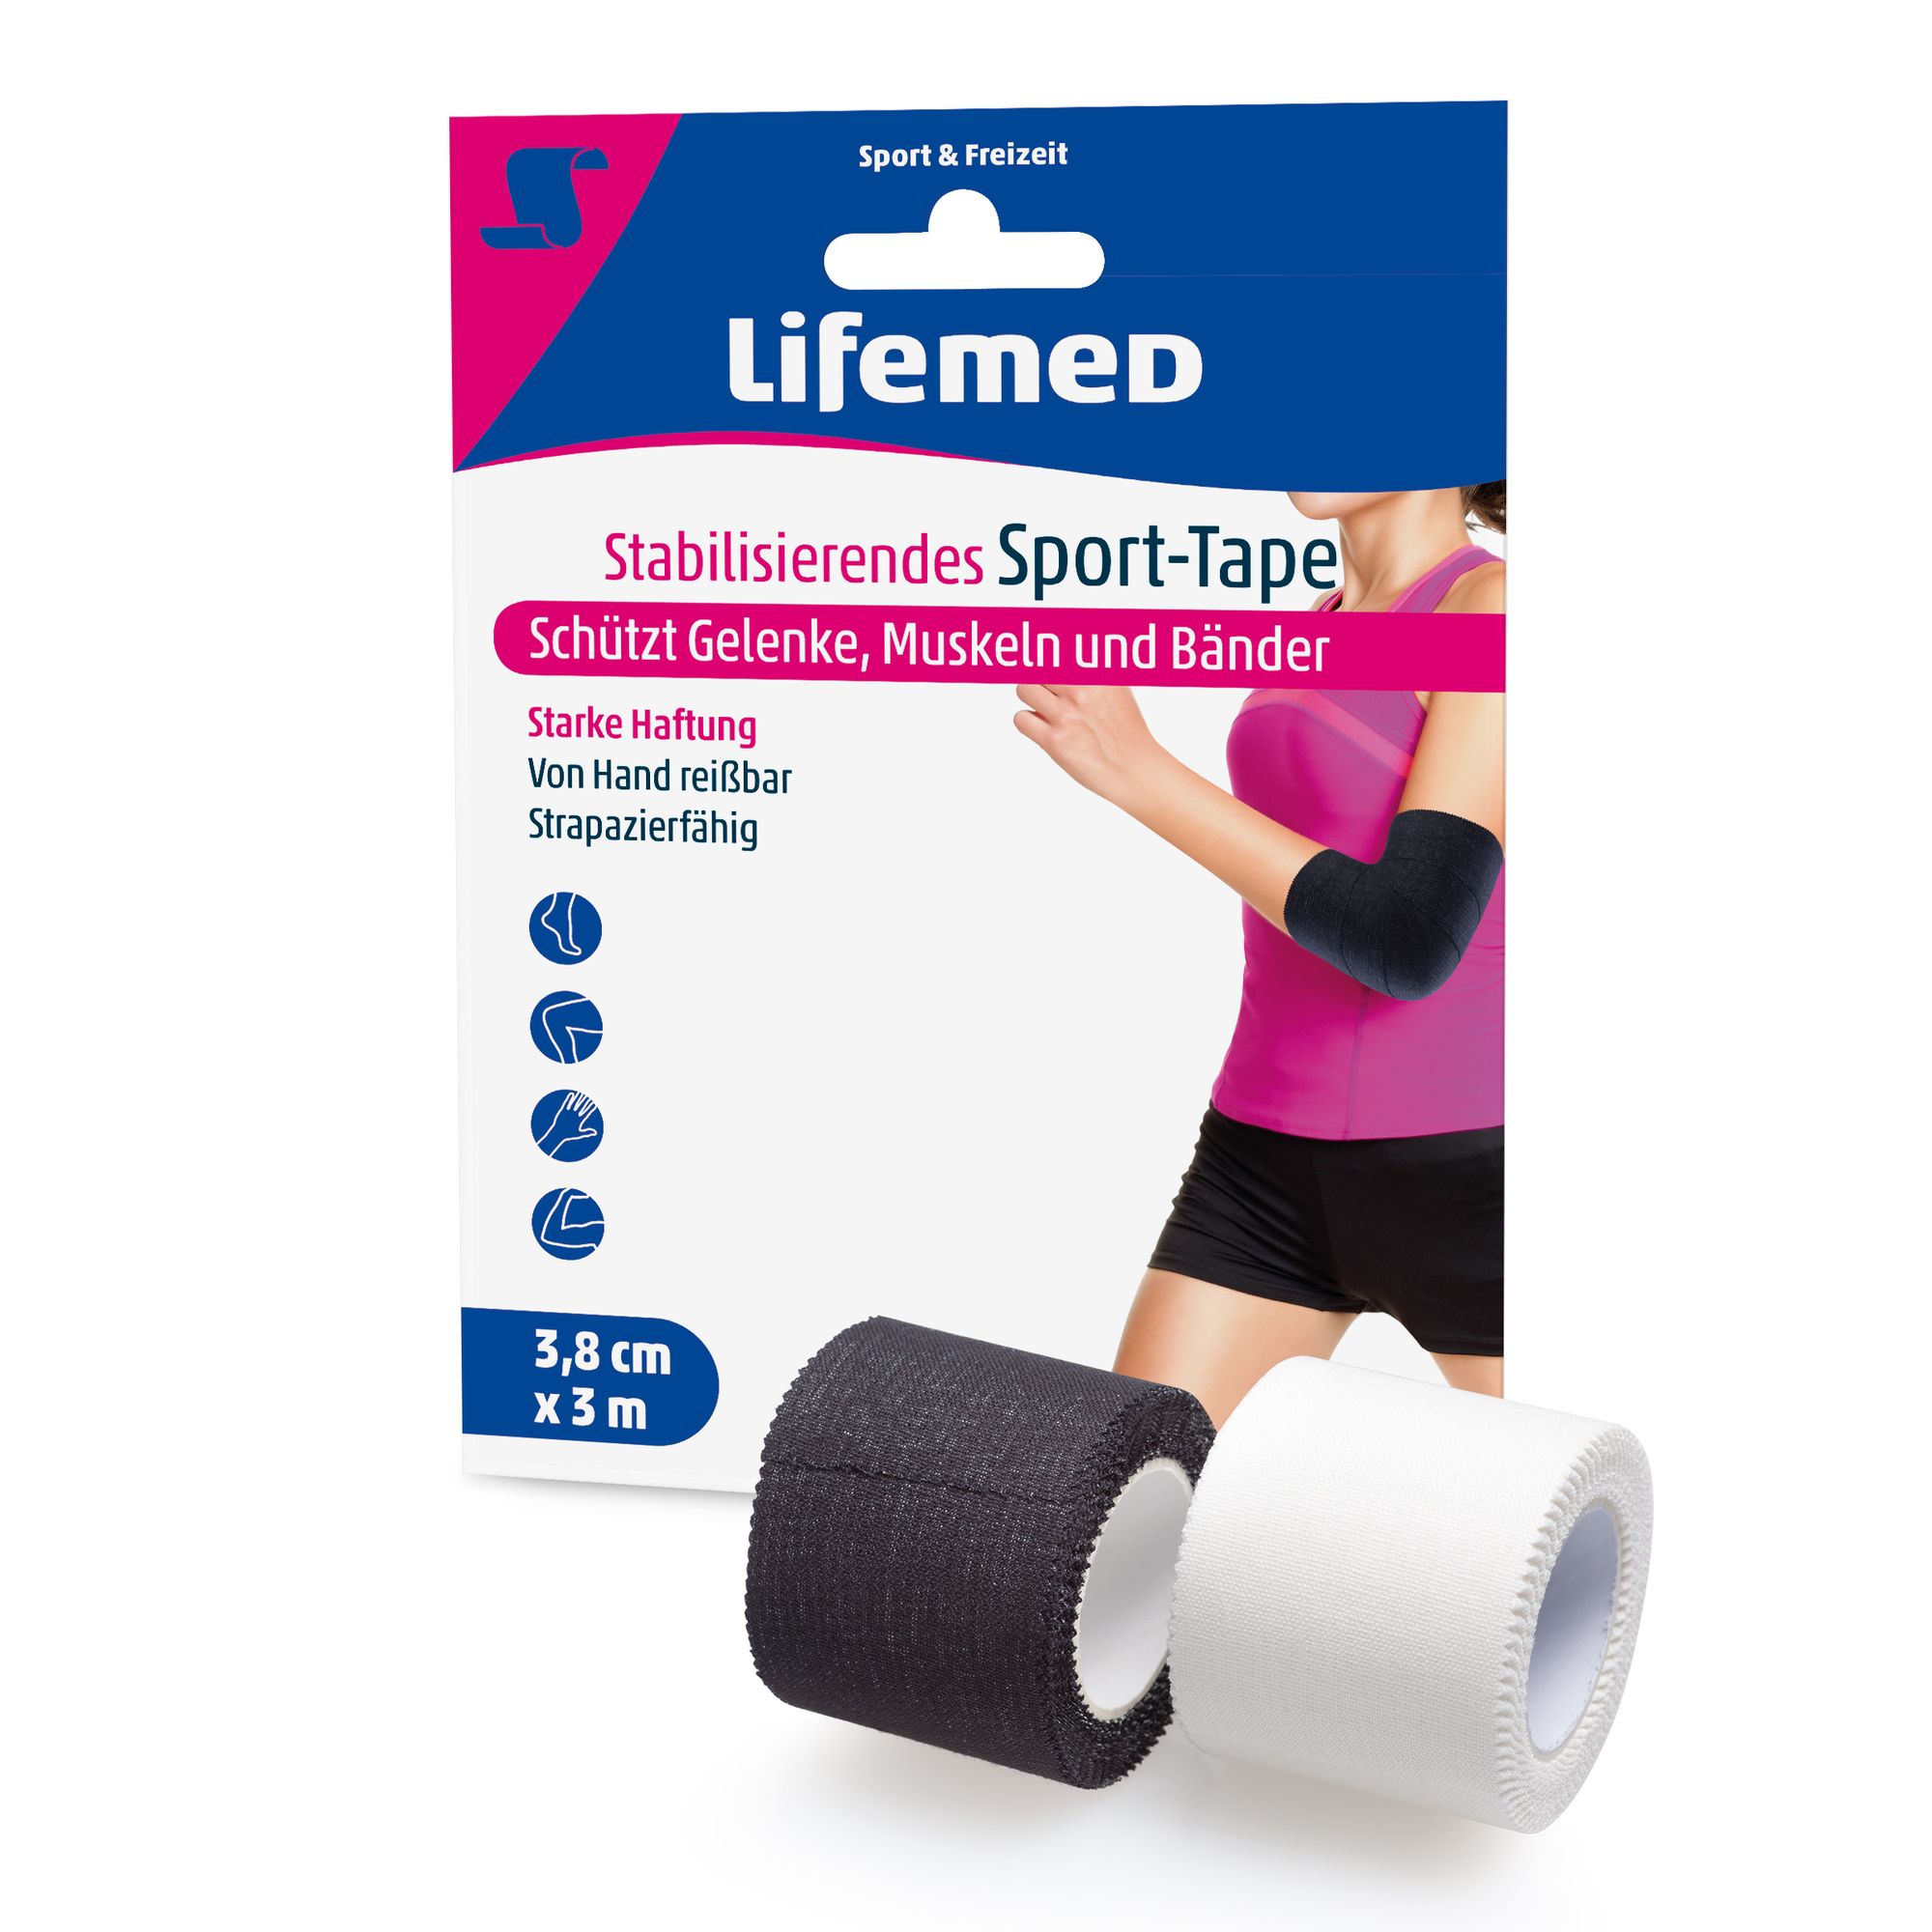 Lifemed 10 Stabilisierende Sport-Tapes 3 m x 3,8 cm 